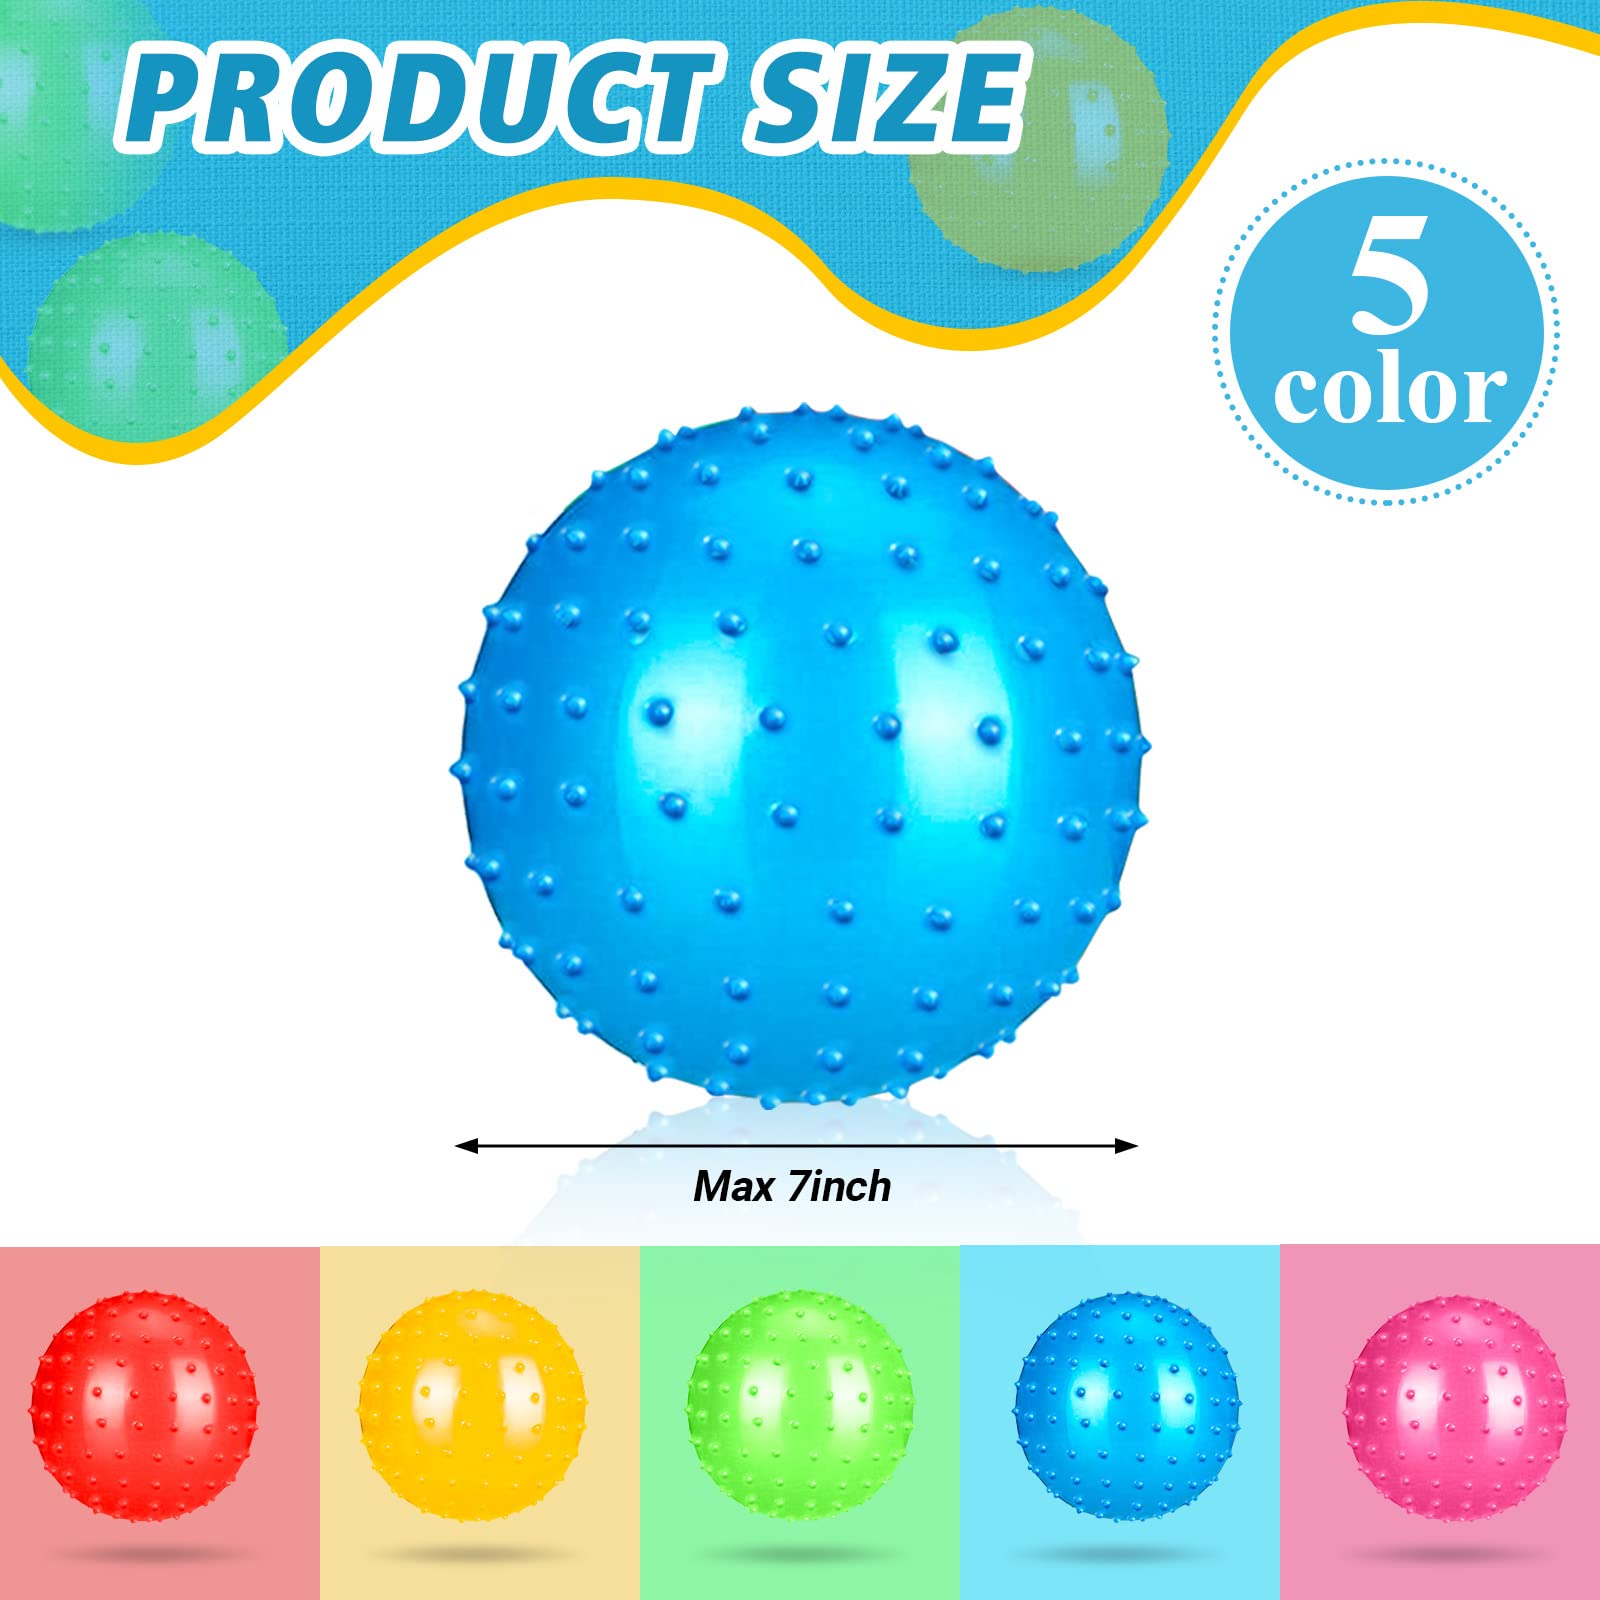 60 Pieces Knobby Balls 7 Inch Sensory Balls with Pump Bouncy Balls Soft Inflatable Ball Colorful Textured Balls Spiky Massage Stress Balls for Toddlers Kids Outdoor Indoor Play Party Favors